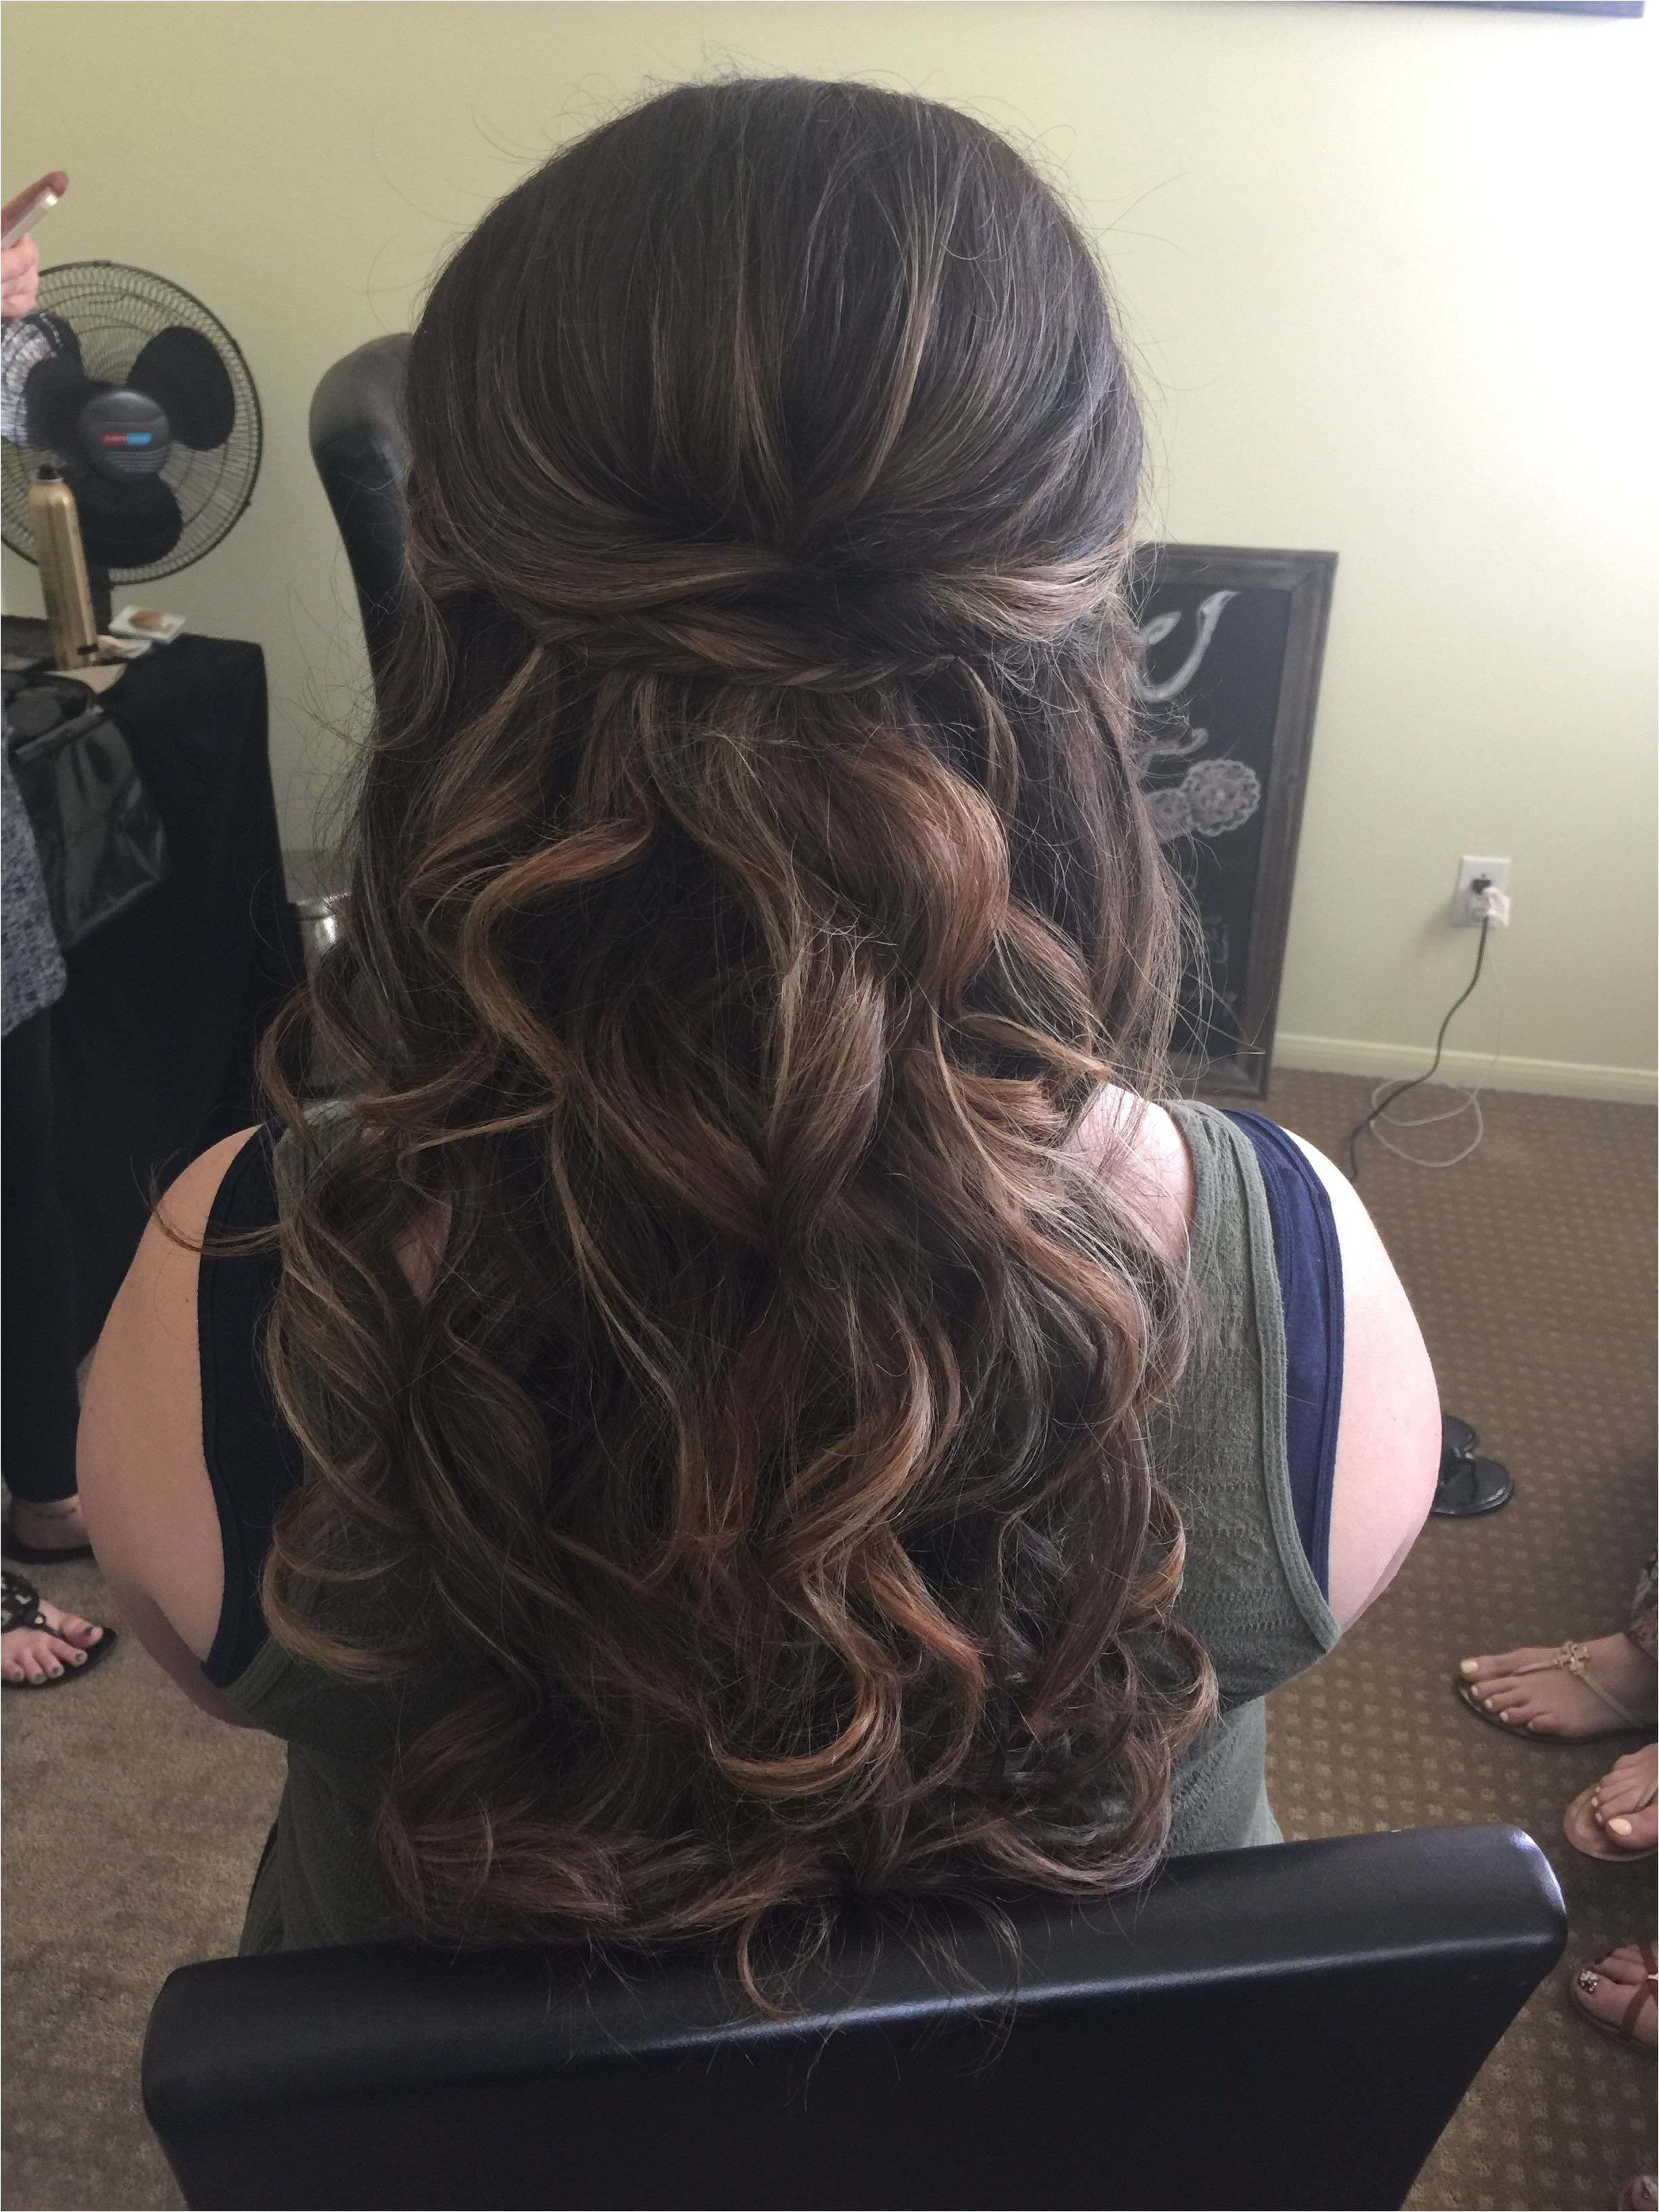 Show me your half up down hairstyles with headband and veil Weddingbee